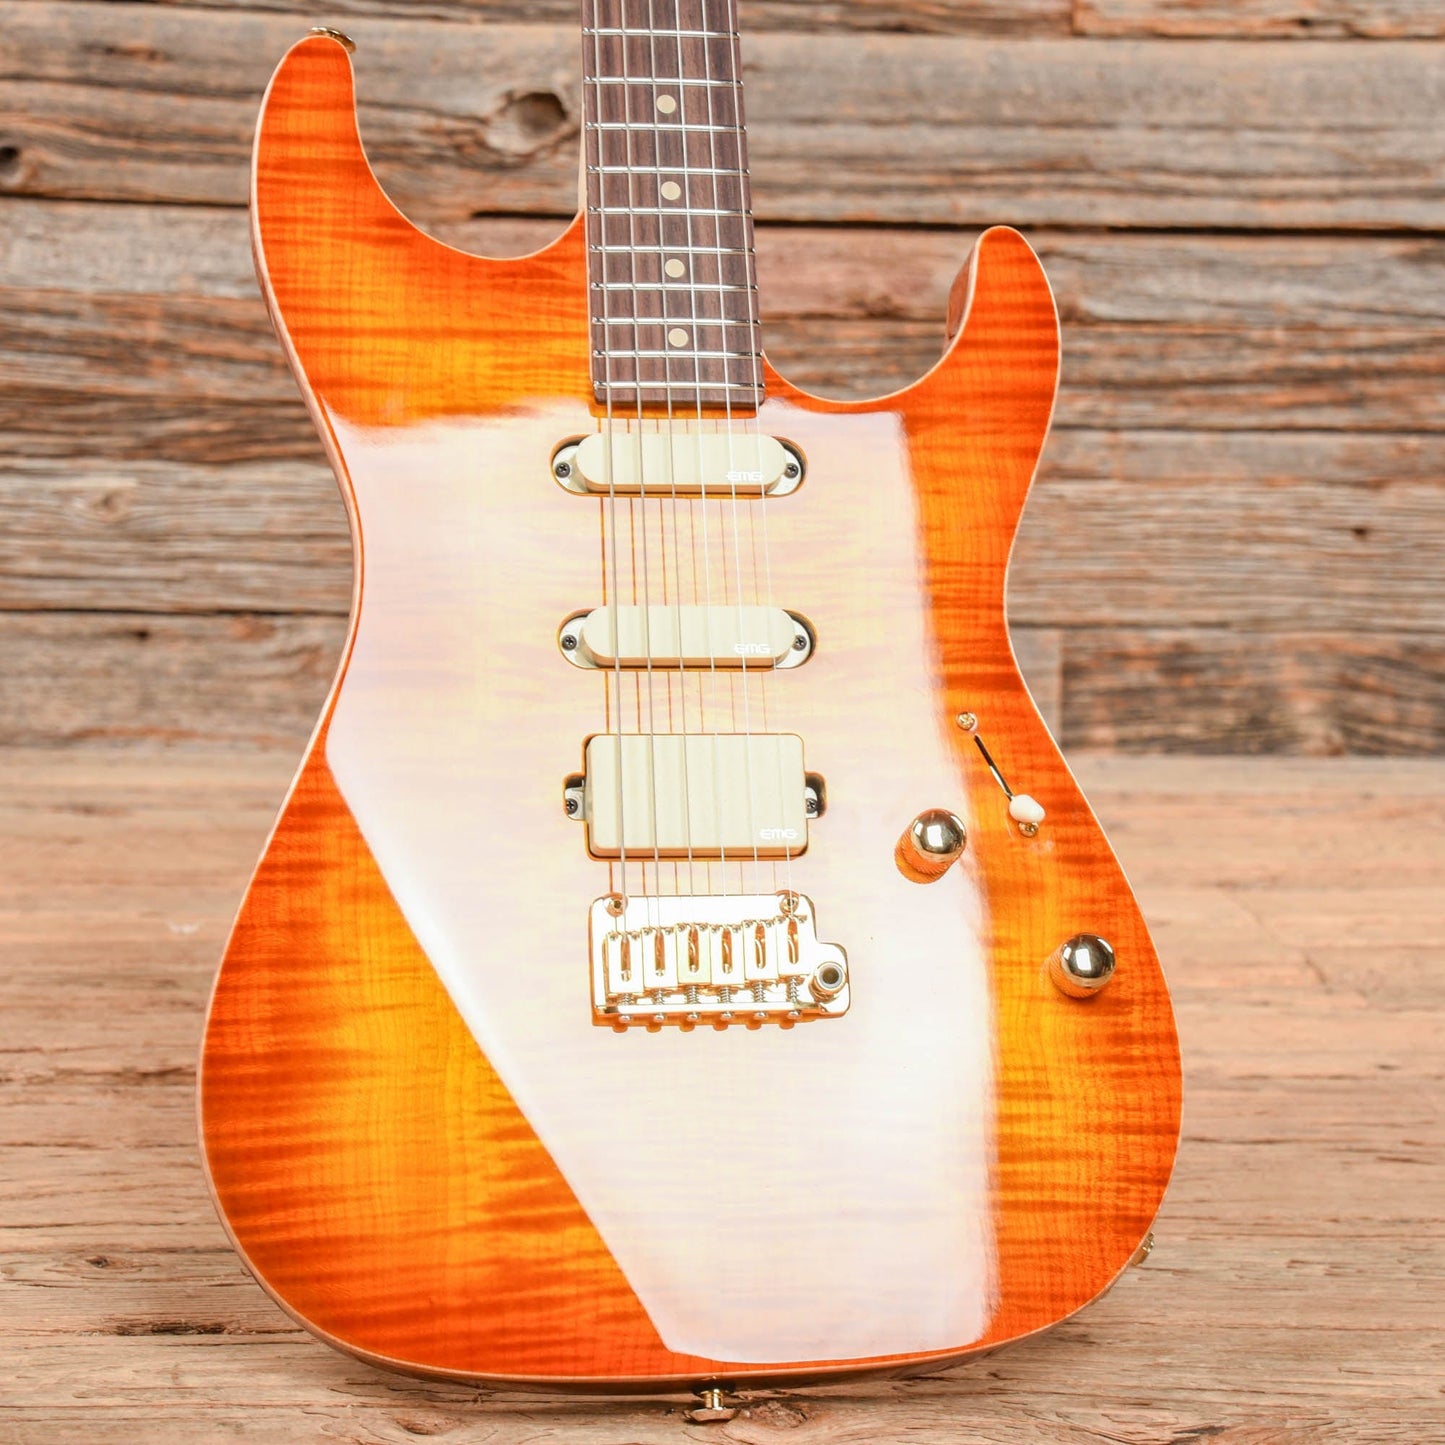 Suhr Limited Edition Standard Legacy Okoume/Curly Maple Sunburst Electric Guitars / Solid Body